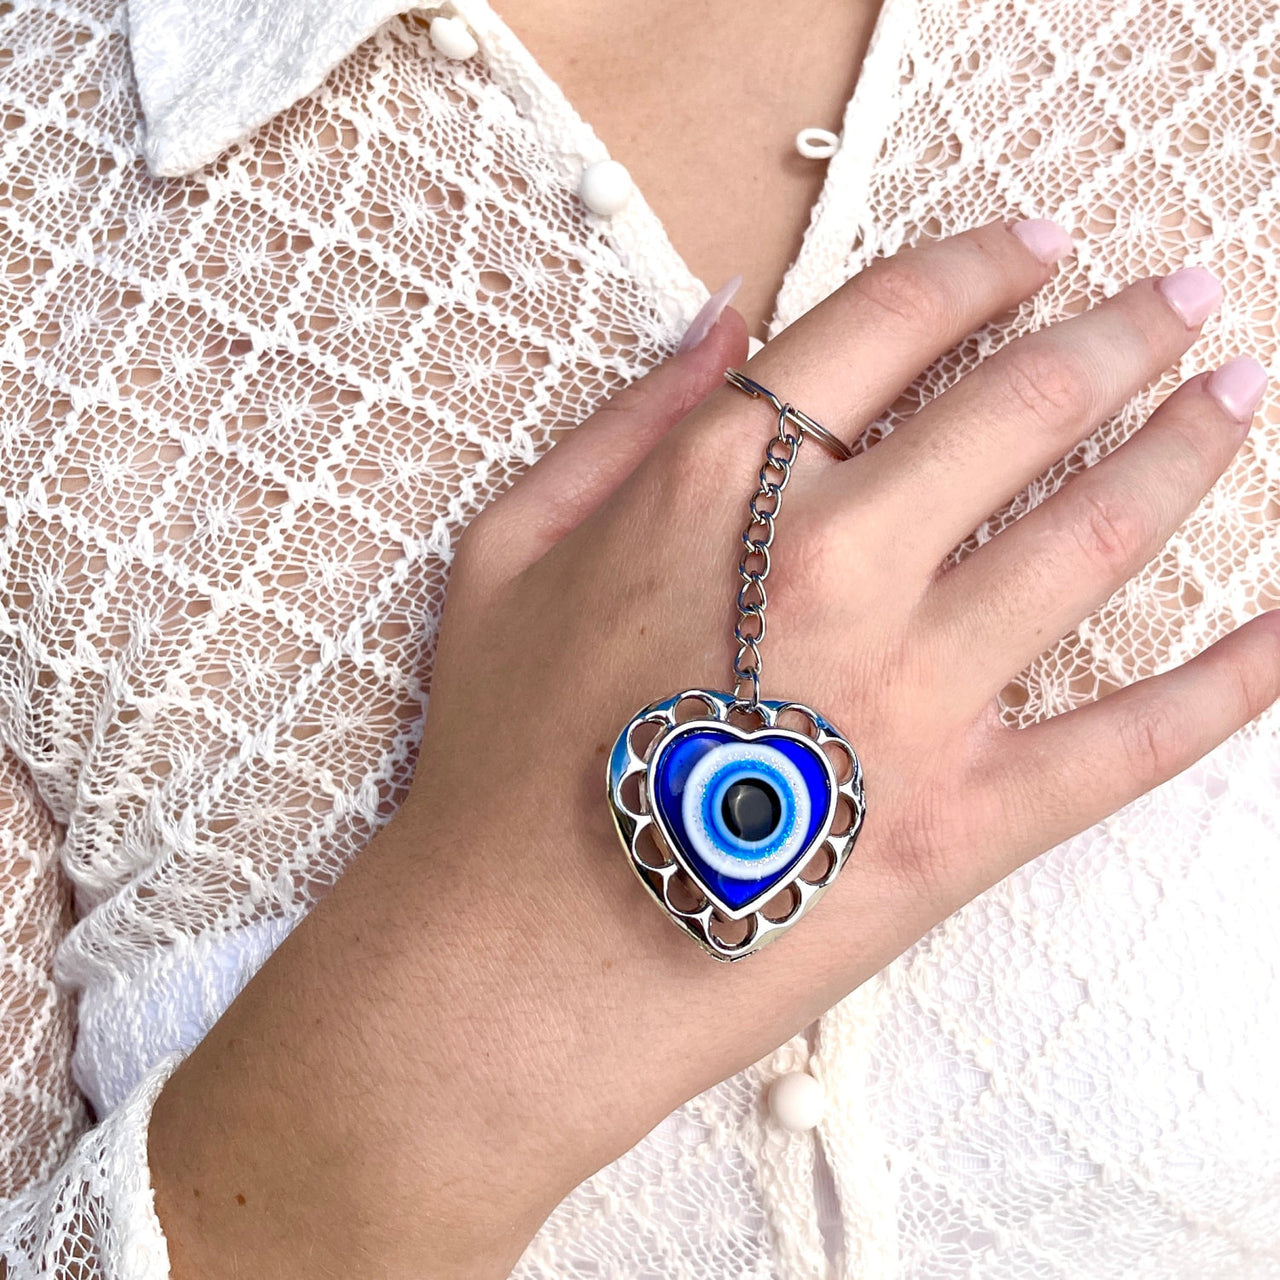 A woman wearing a bracelet with a blue eye from the Evil Eye Keychain/Ornaments collection